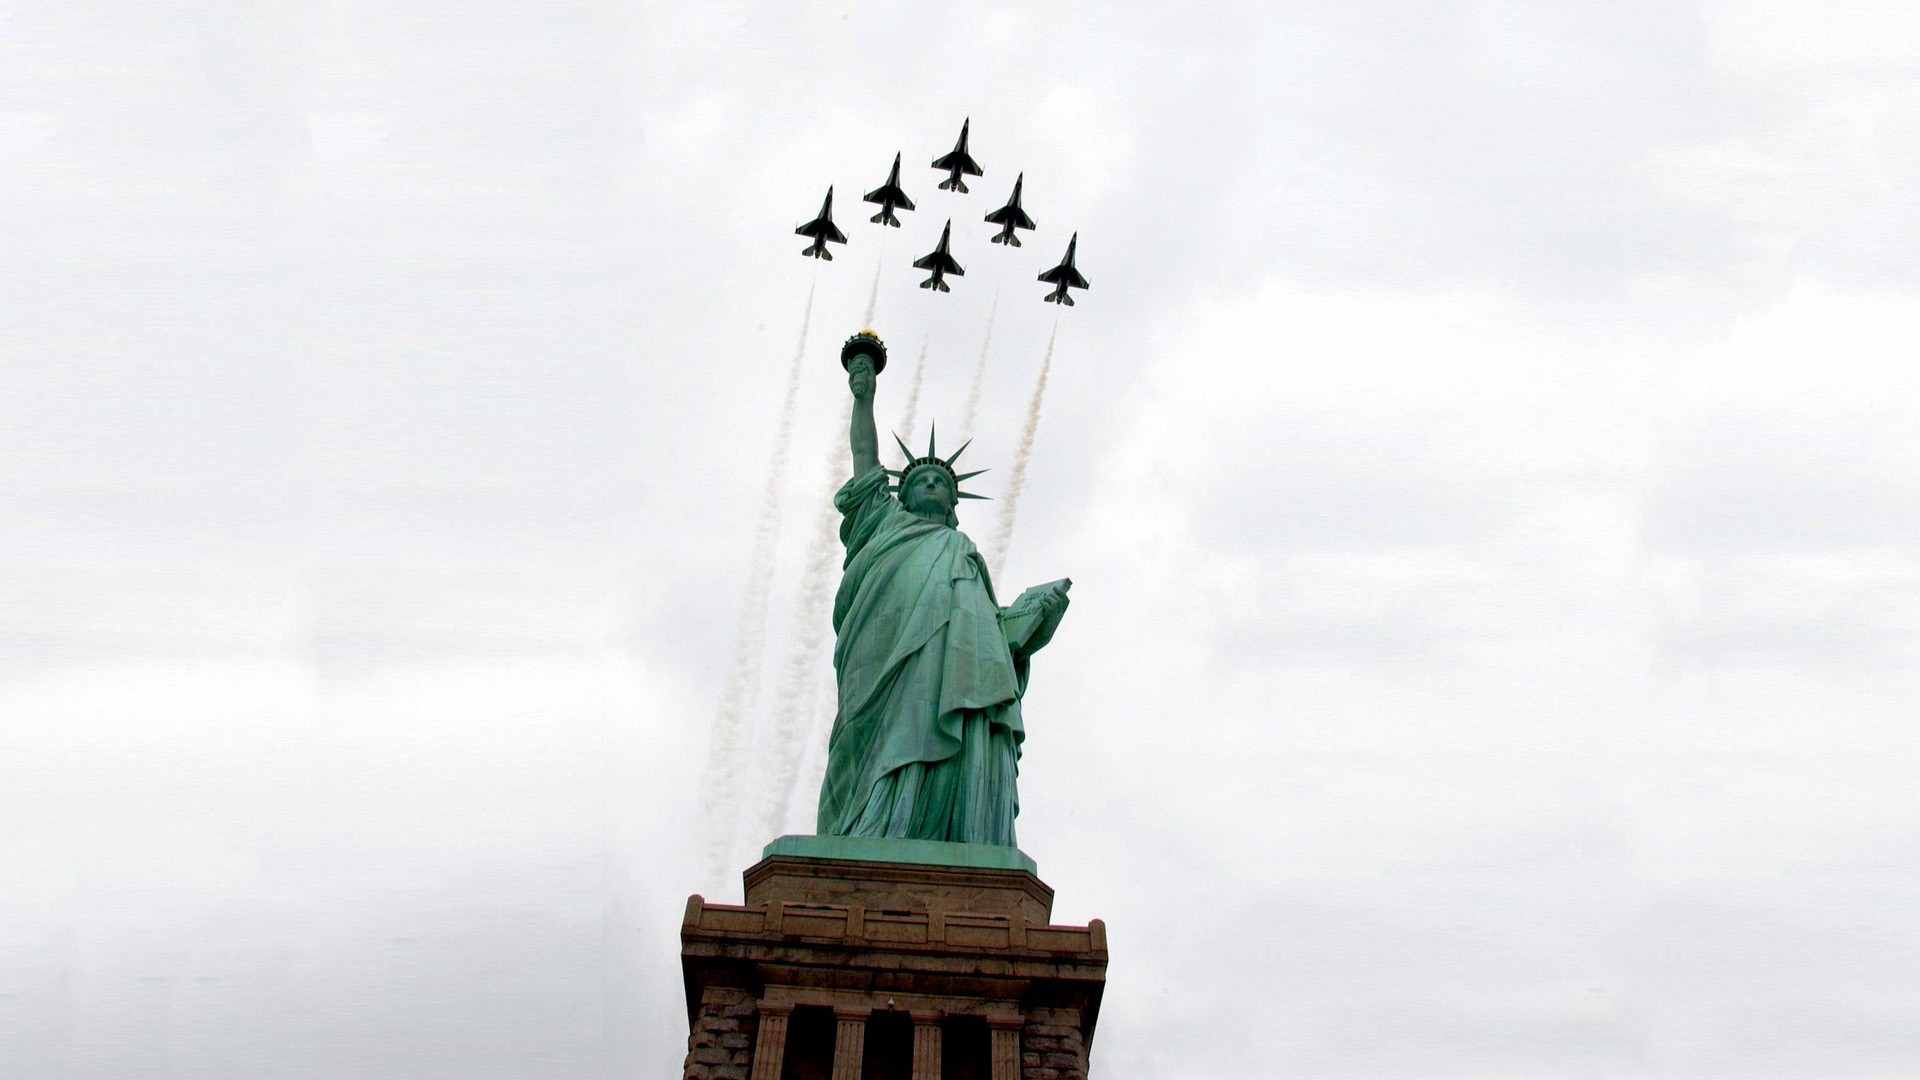 General 1920x1080 USA worm's eye view aircraft statue low-angle Statue of Liberty landmark New York City military aircraft vehicle